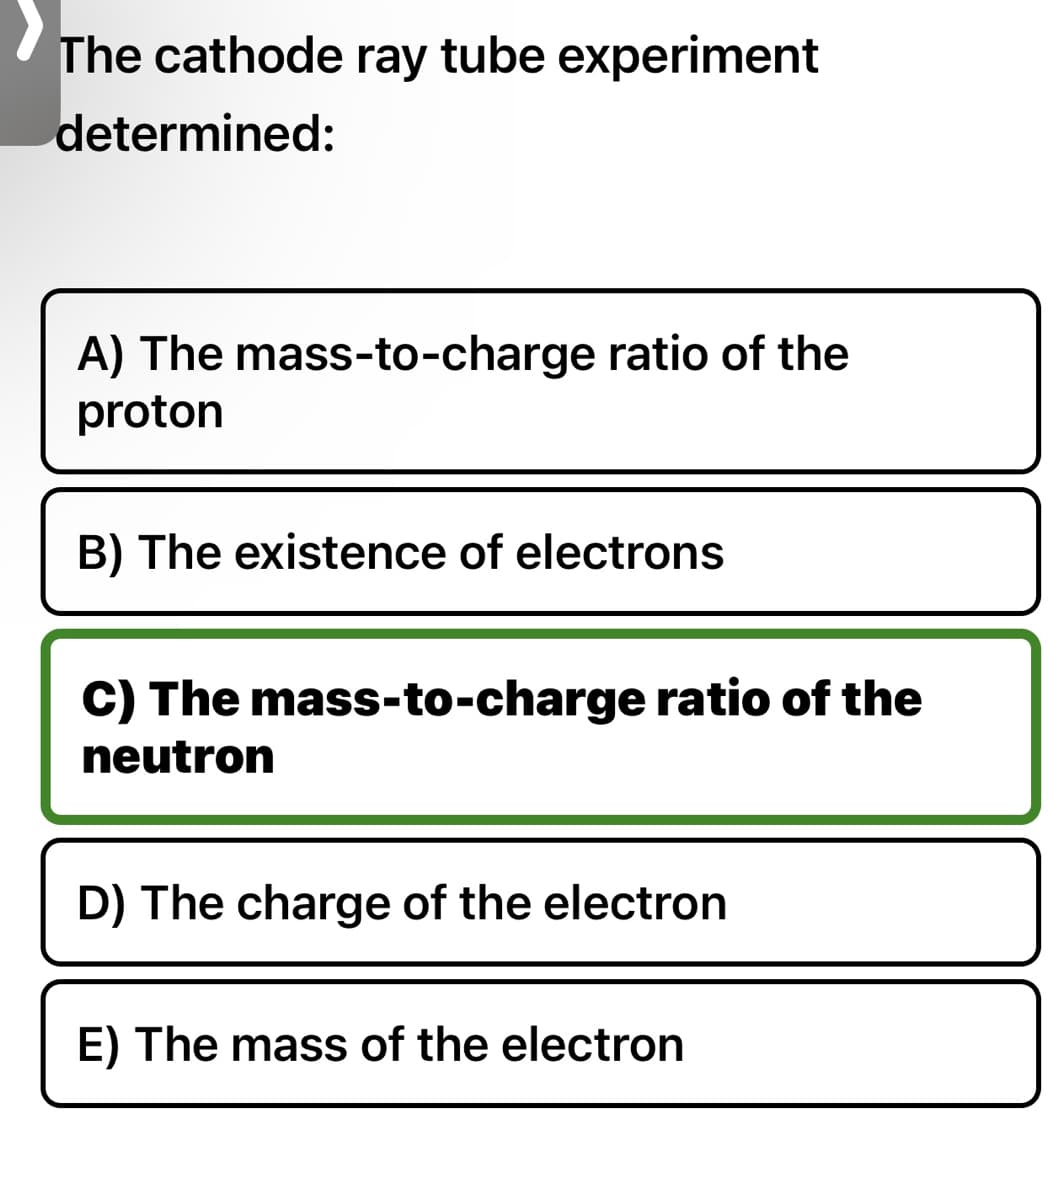 The cathode ray tube experiment
determined:
A) The mass-to-charge ratio of the
proton
B) The existence of electrons
C) The mass-to-charge ratio of the
neutron
D) The charge of the electron
E) The mass of the electron